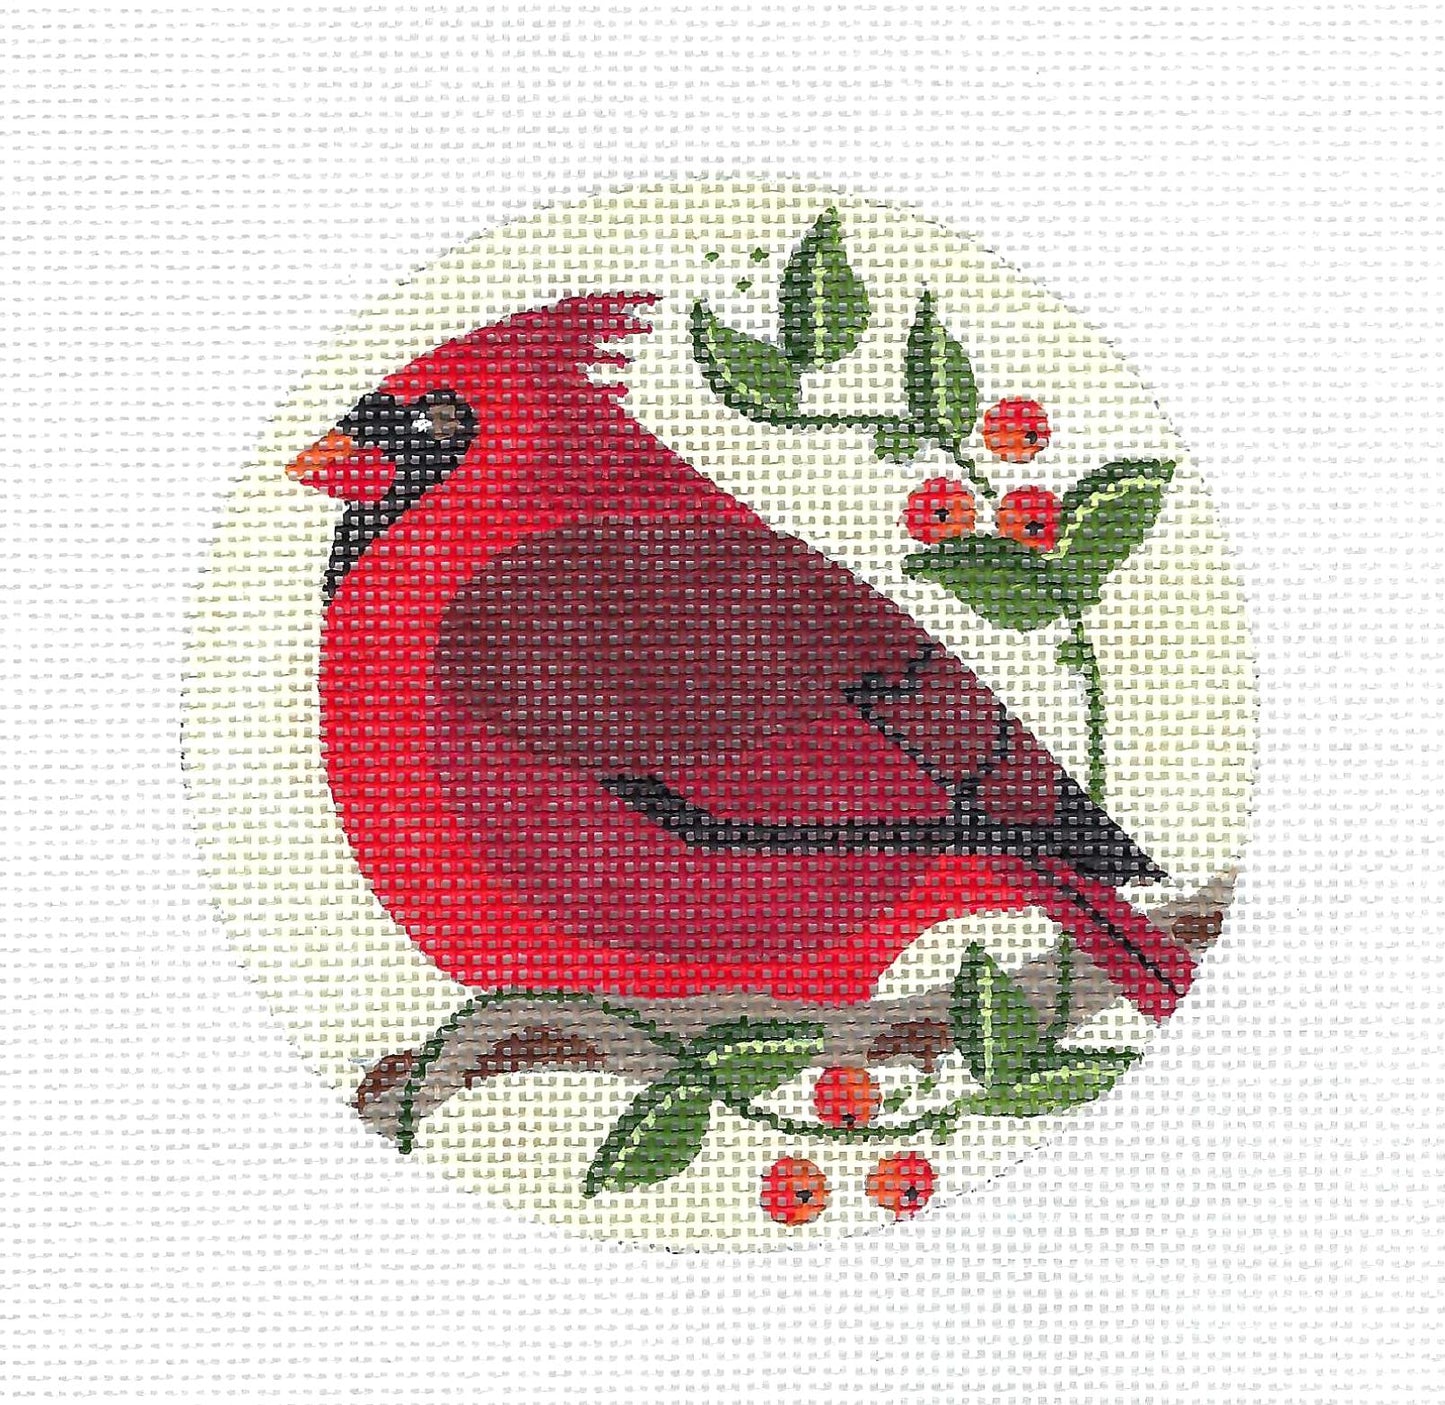 Bird Canvas ~ Cardinal Bird in Berries handpainted 4" Rd. Needlepoint Ornament Canvas by Melissa Prince